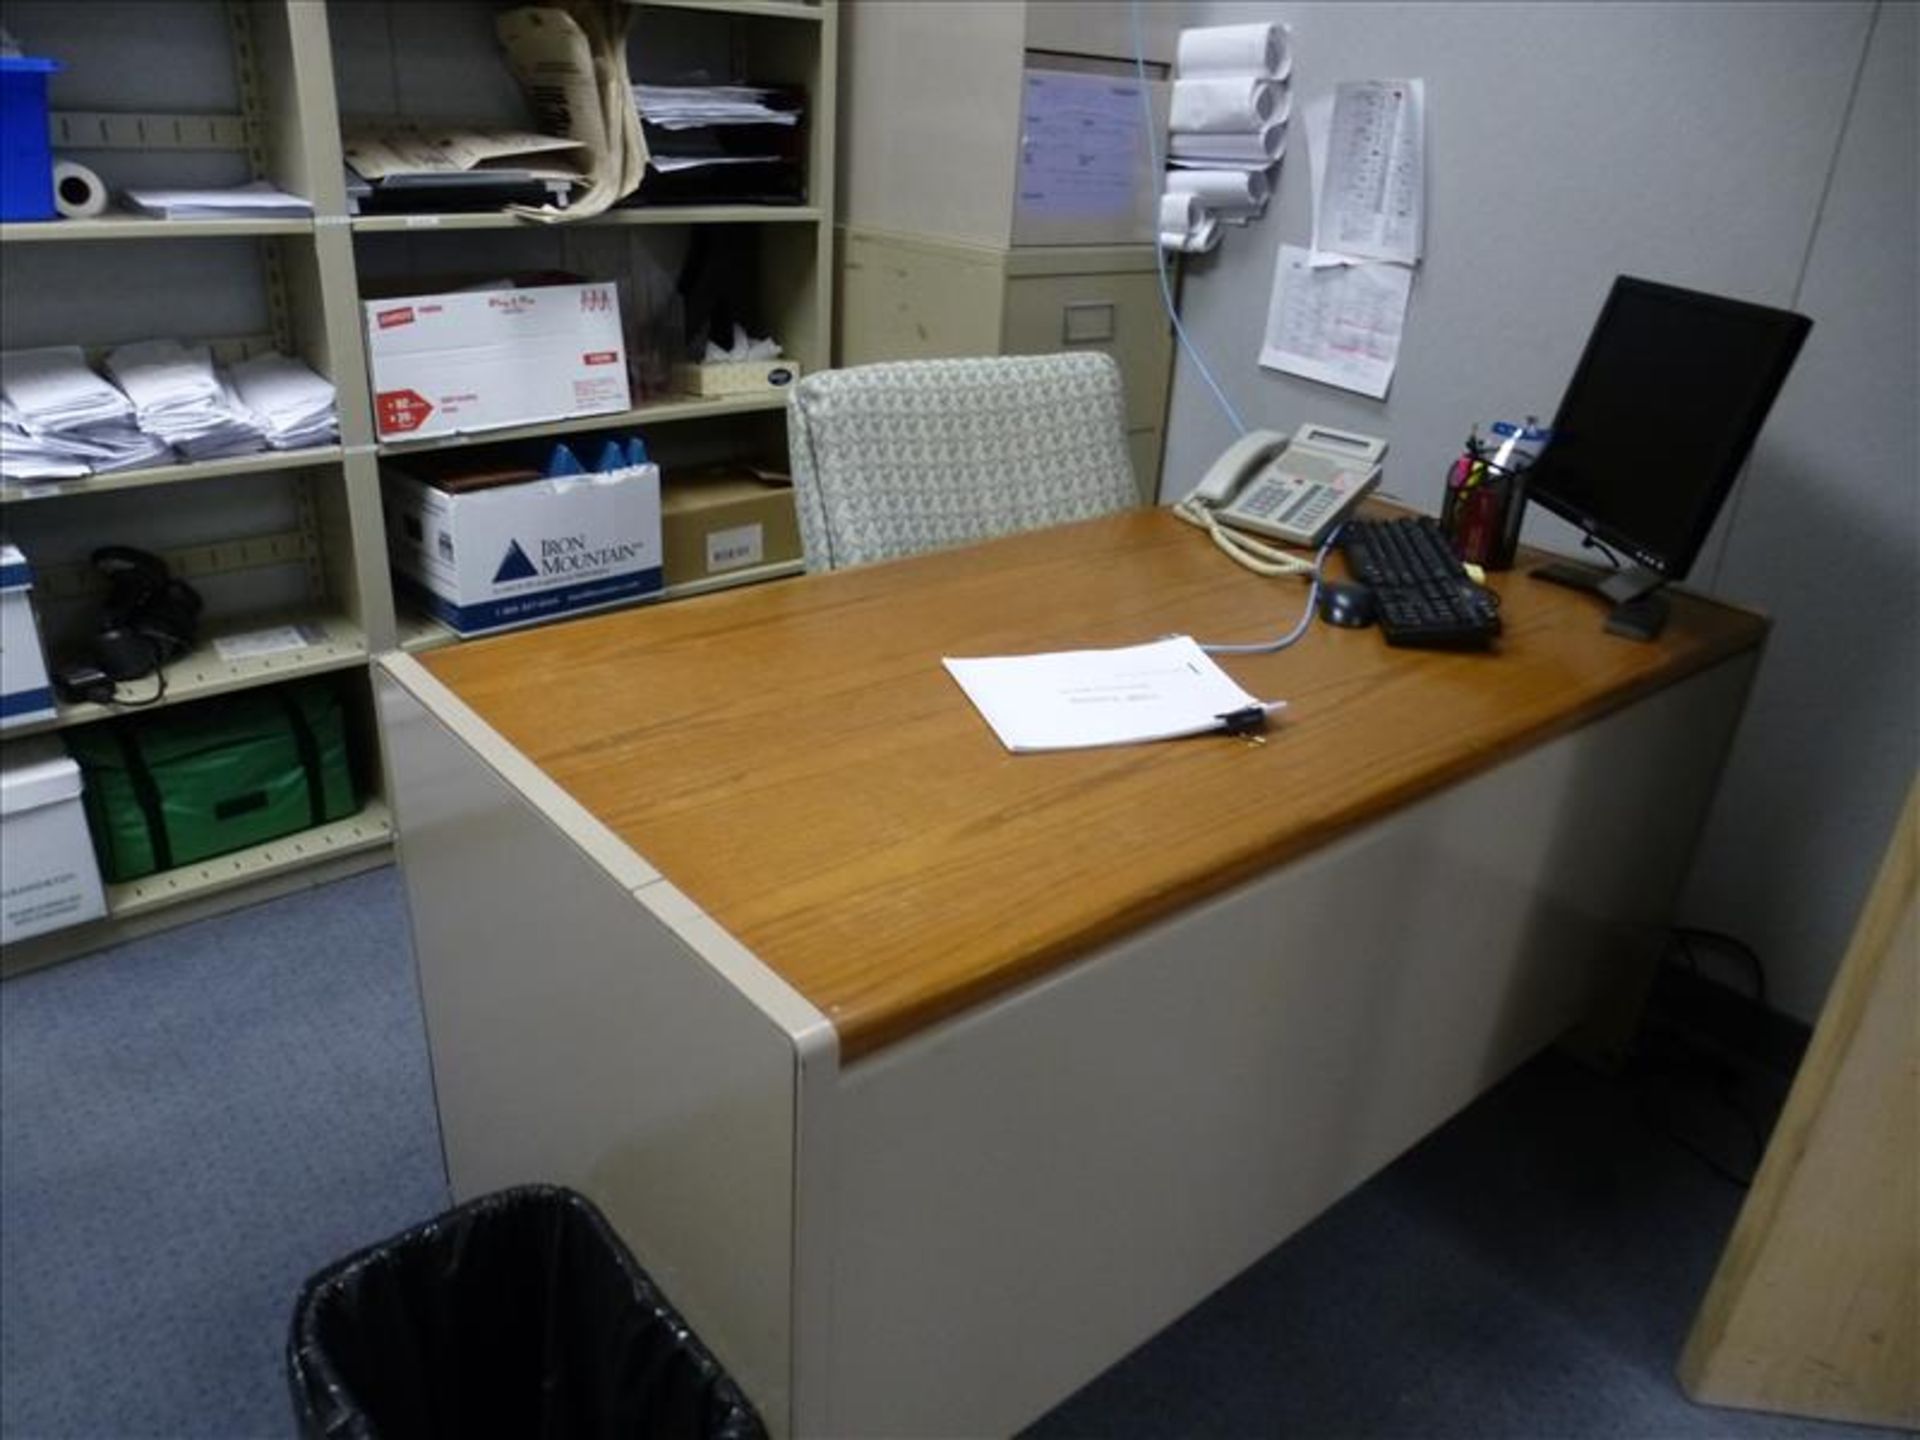 Office No. 27 (next to Office No. 28) - office furniture contents only (located at 150 Bartor Rd